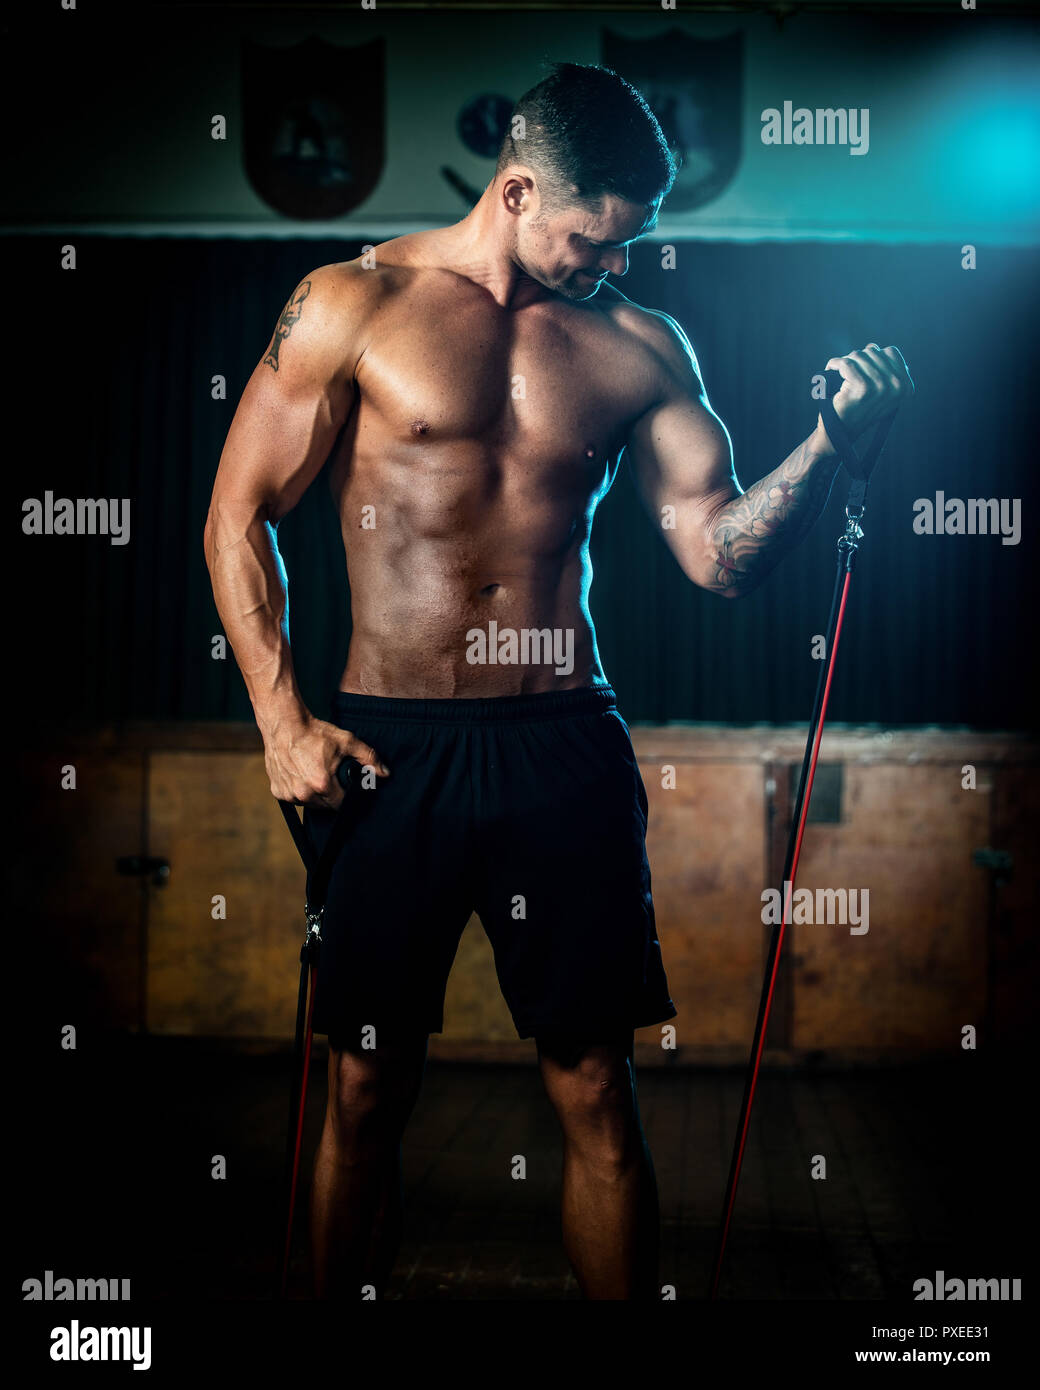 Male using resistance bands during training exercise Stock Photo